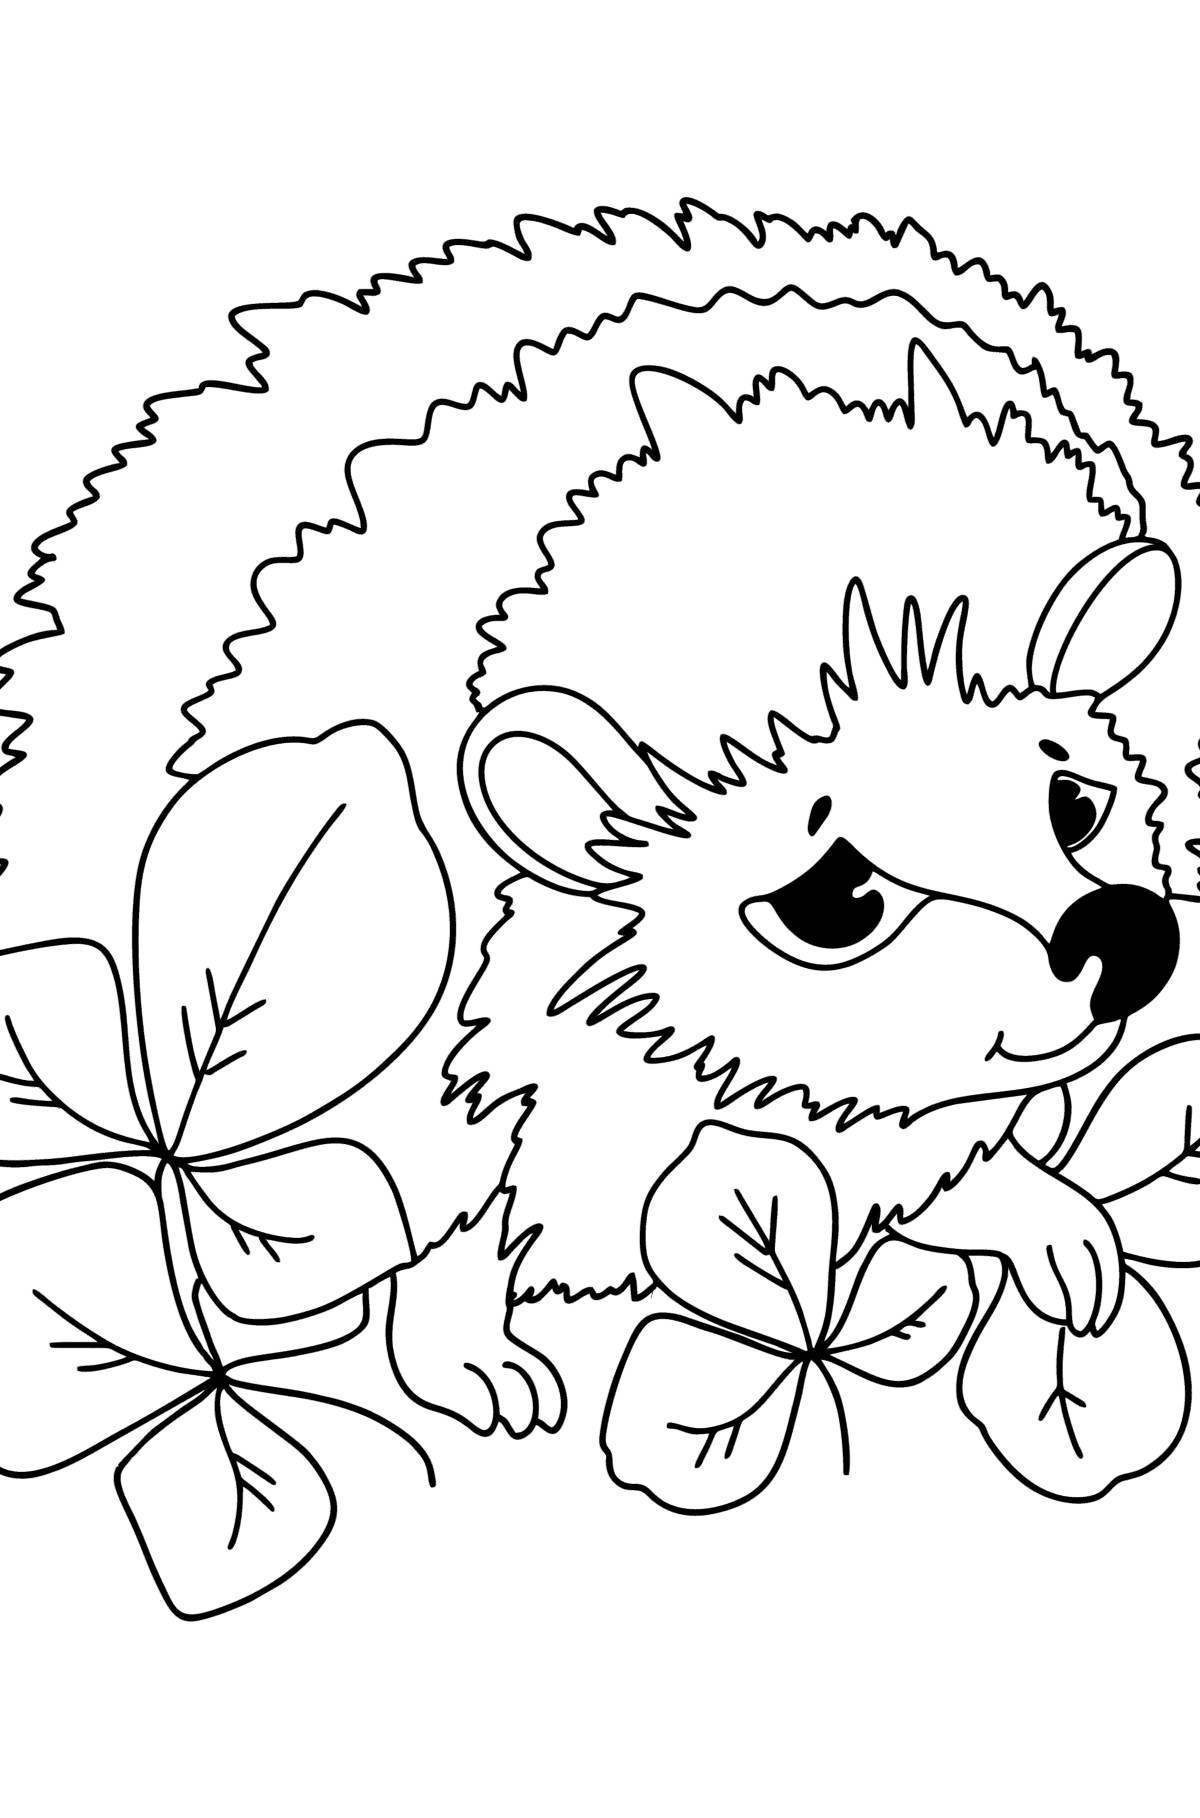 Hedgehog and teddy bear coloring book